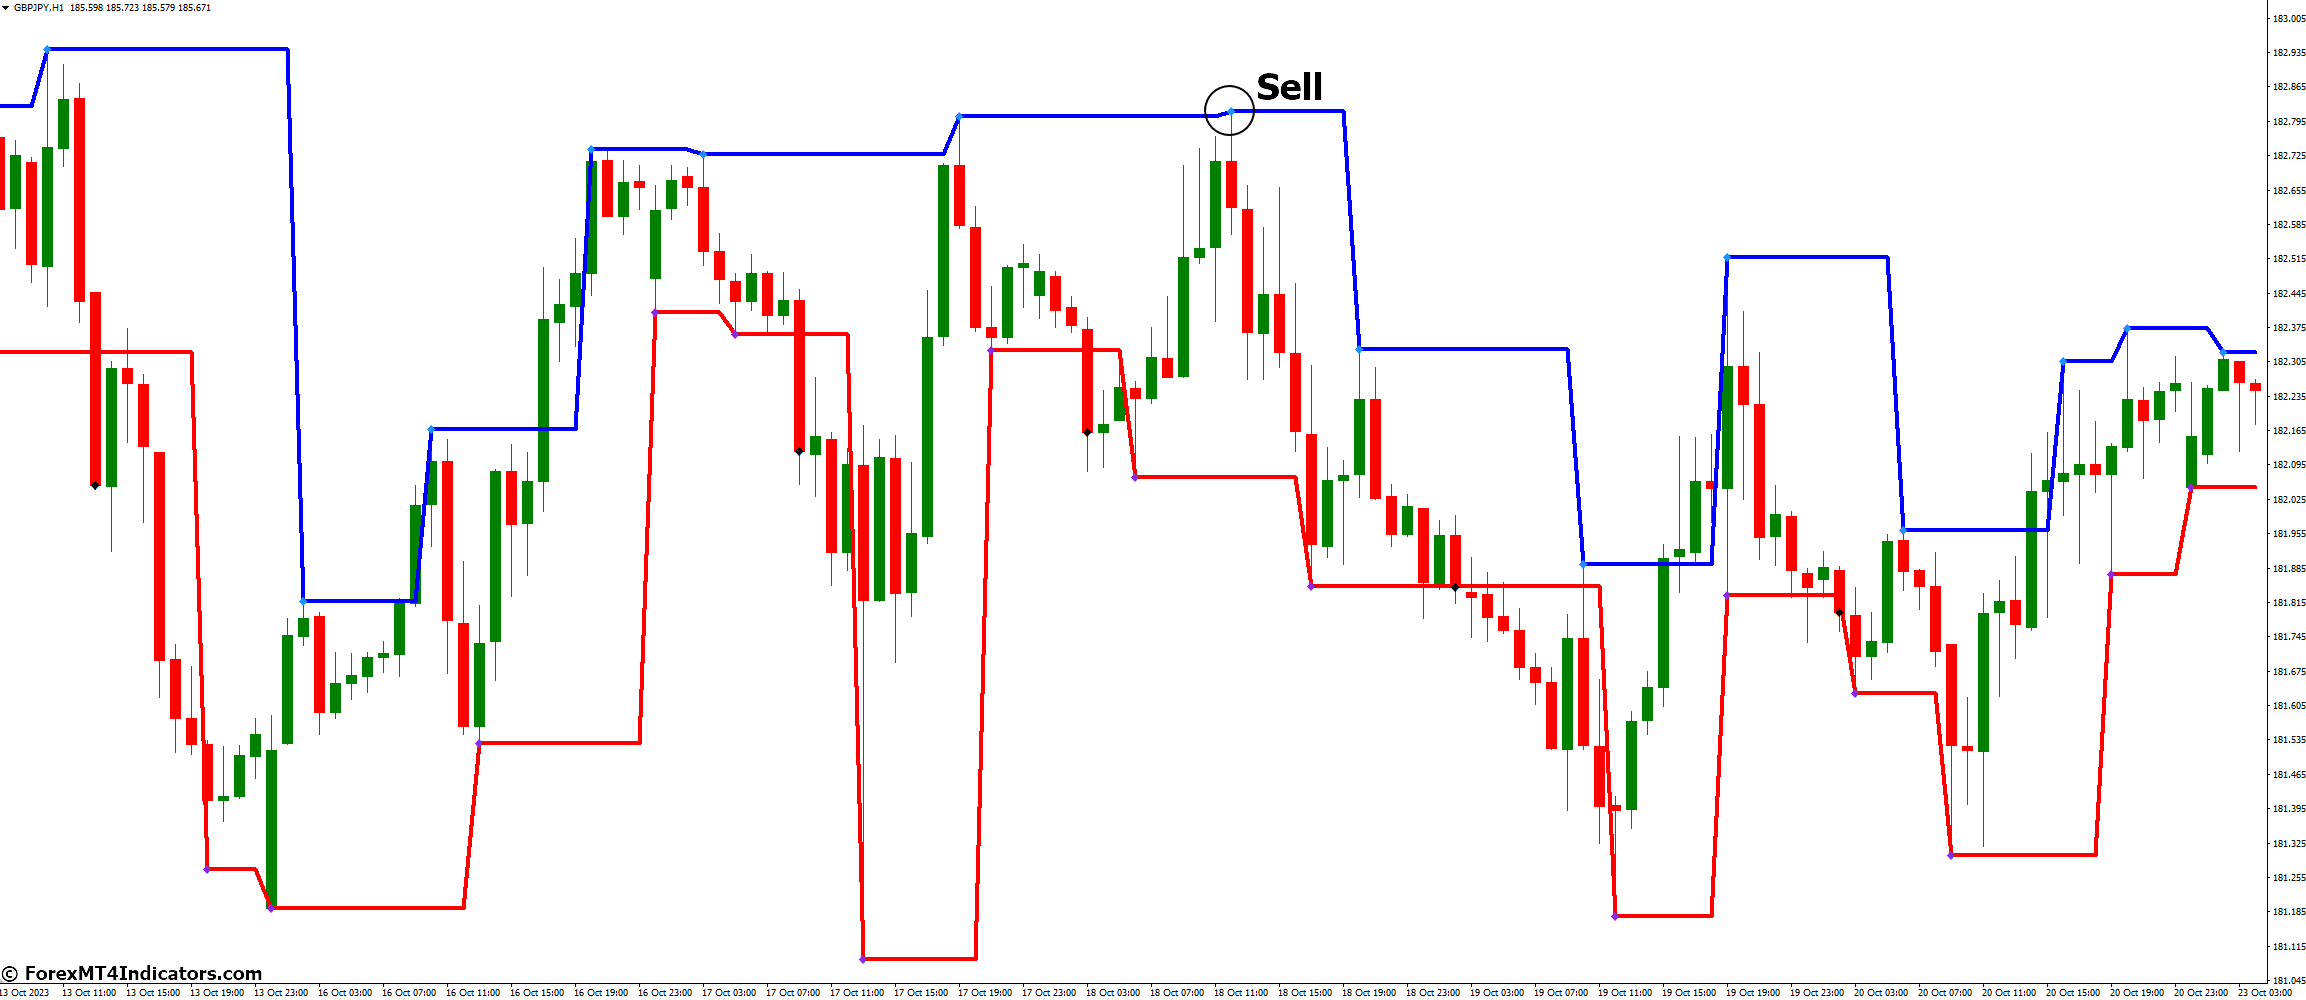 How to Trade with Fractal Levels Indicator - Sell Entry